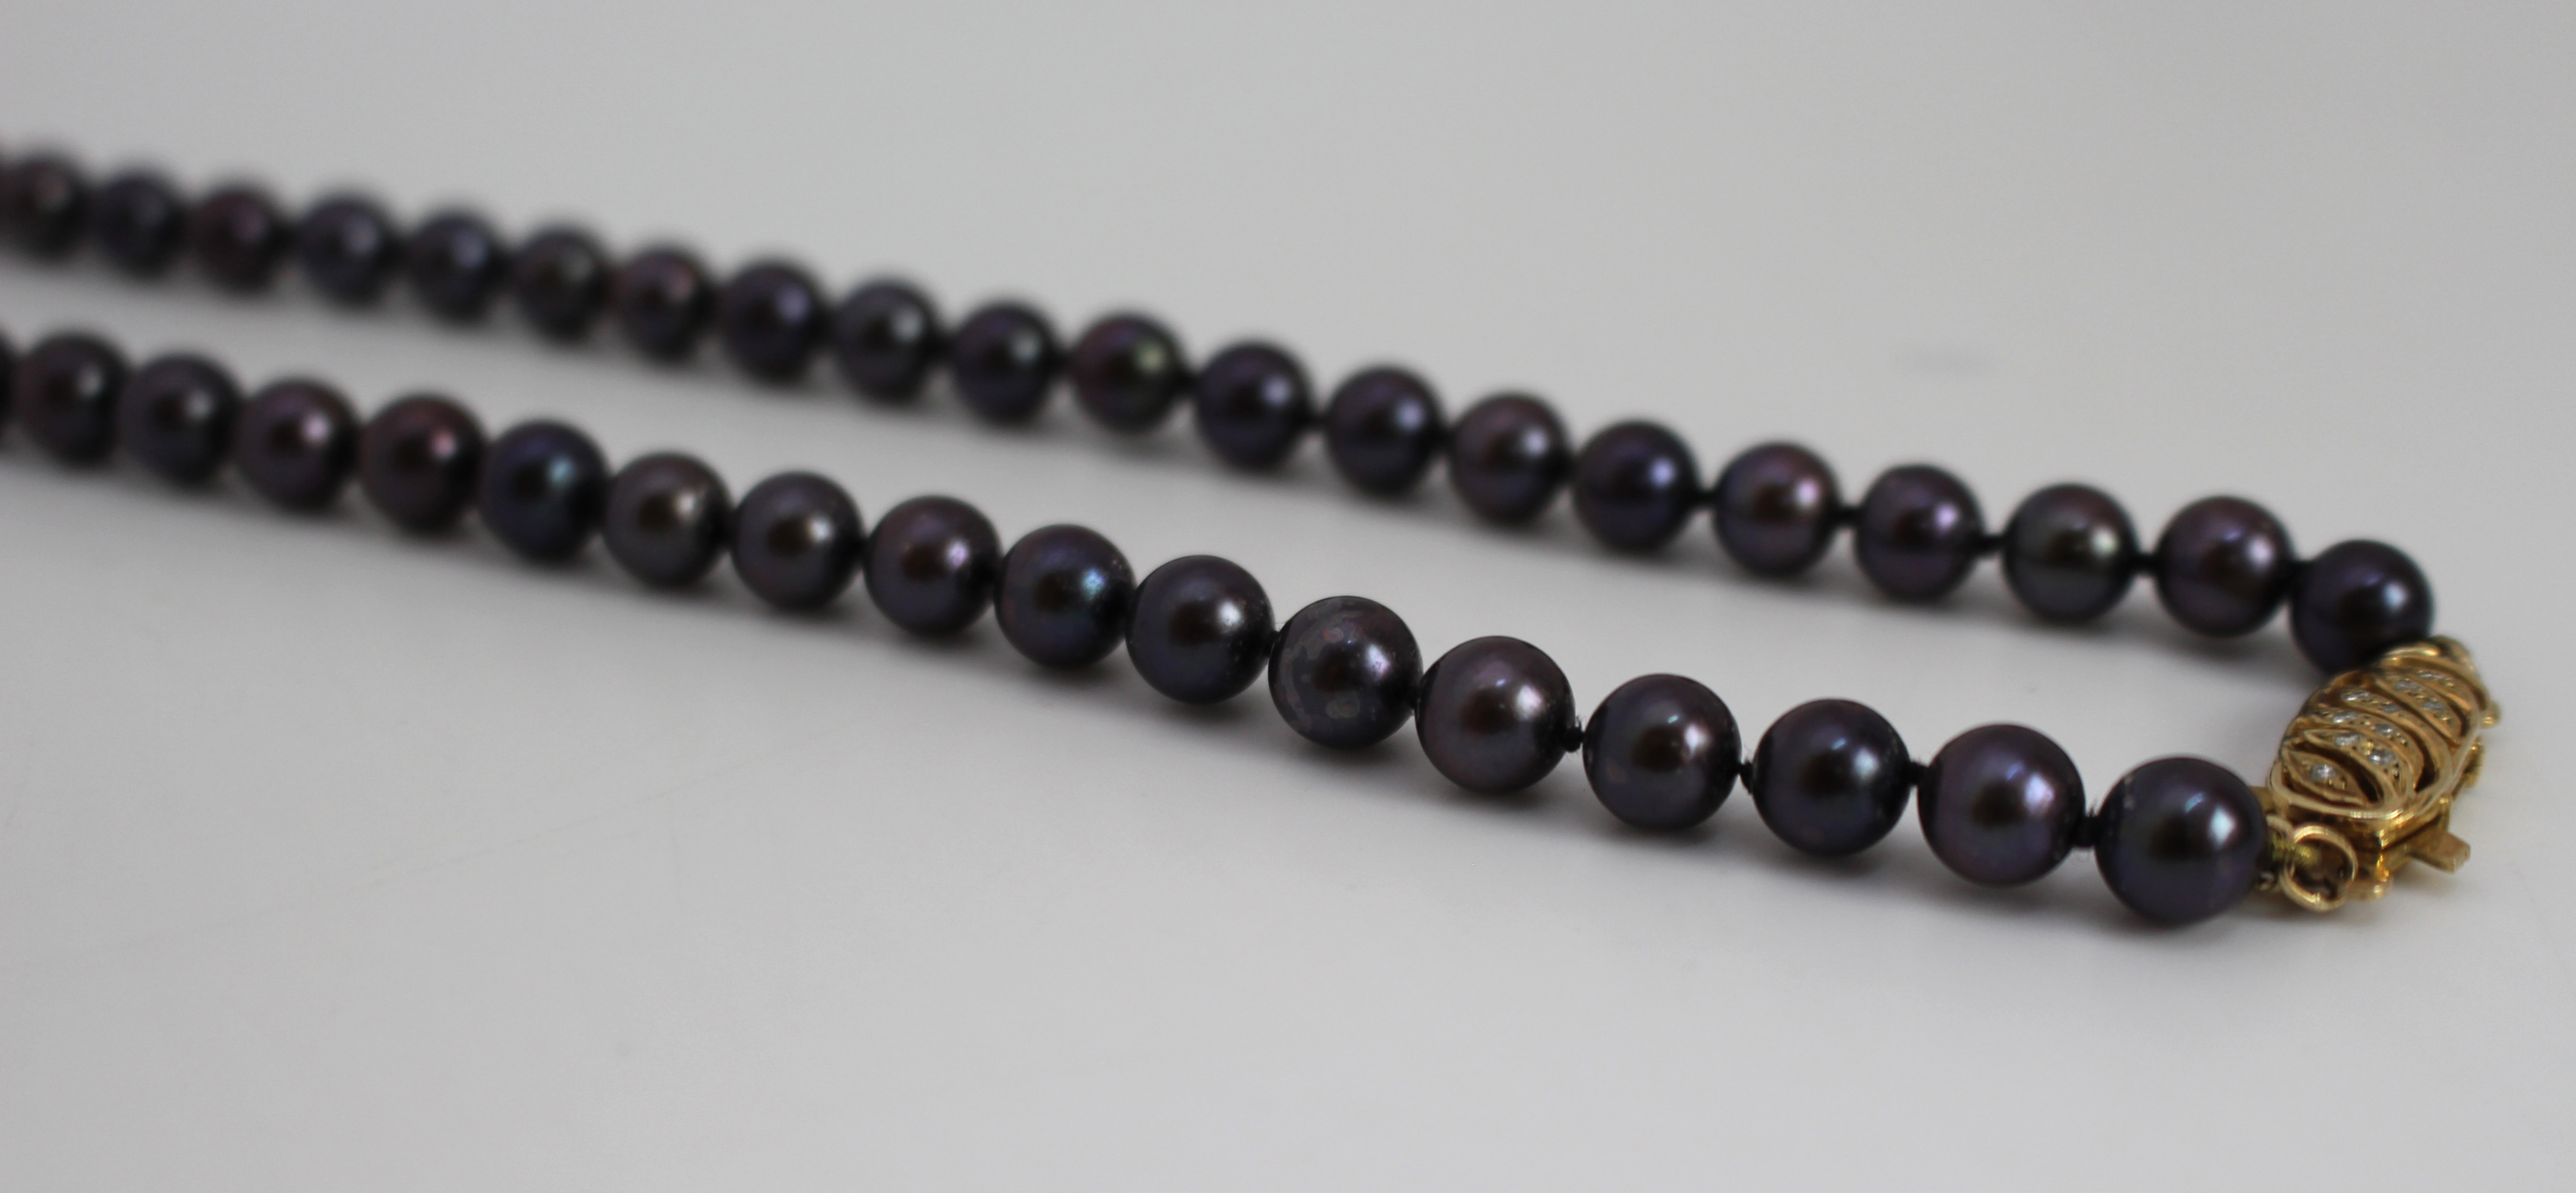 Black Pearl Necklace - Image 6 of 6